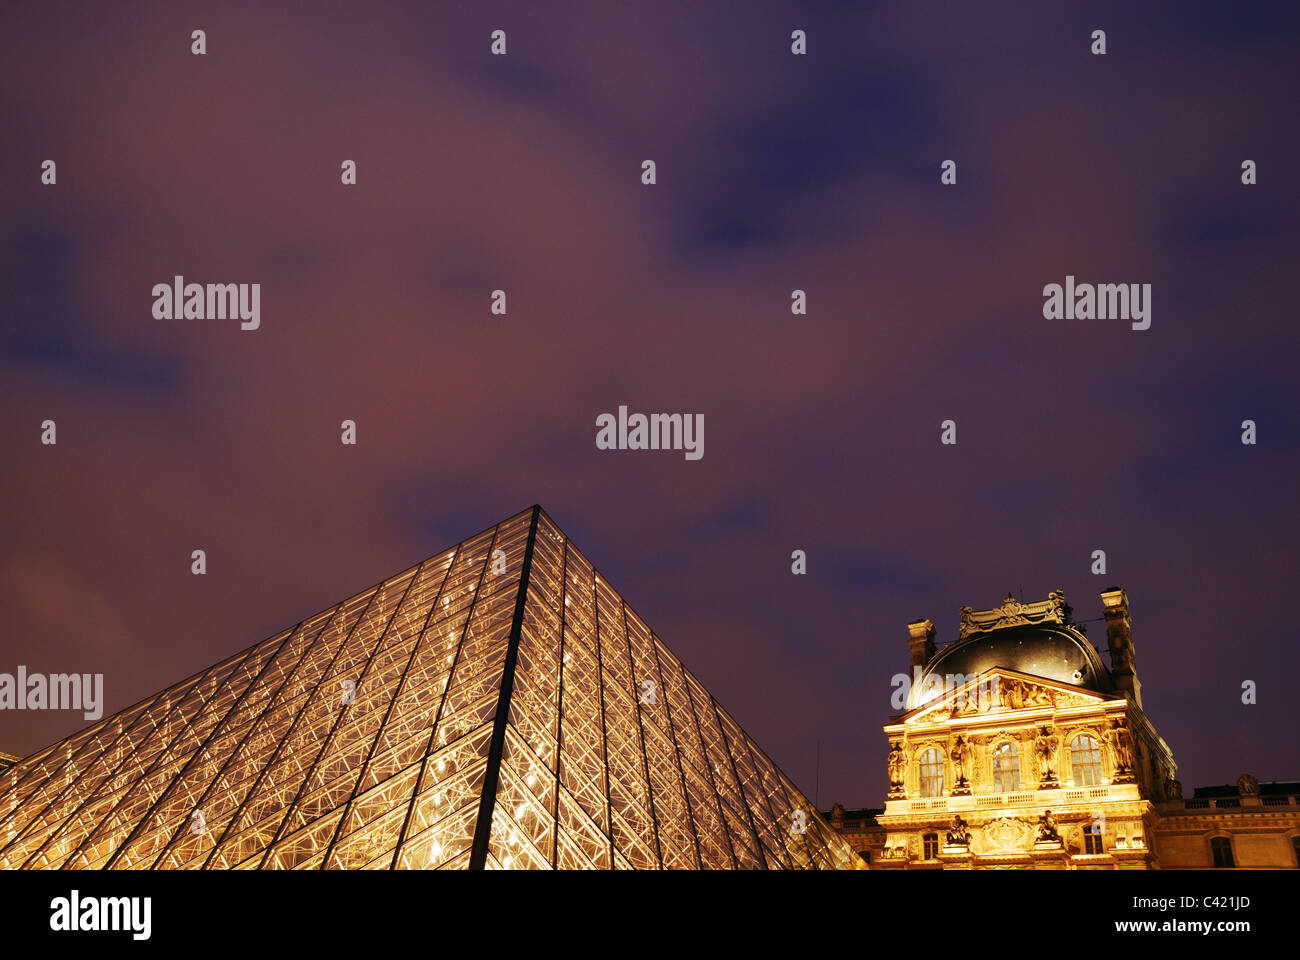 The Louvre Museum at night Stock Photo